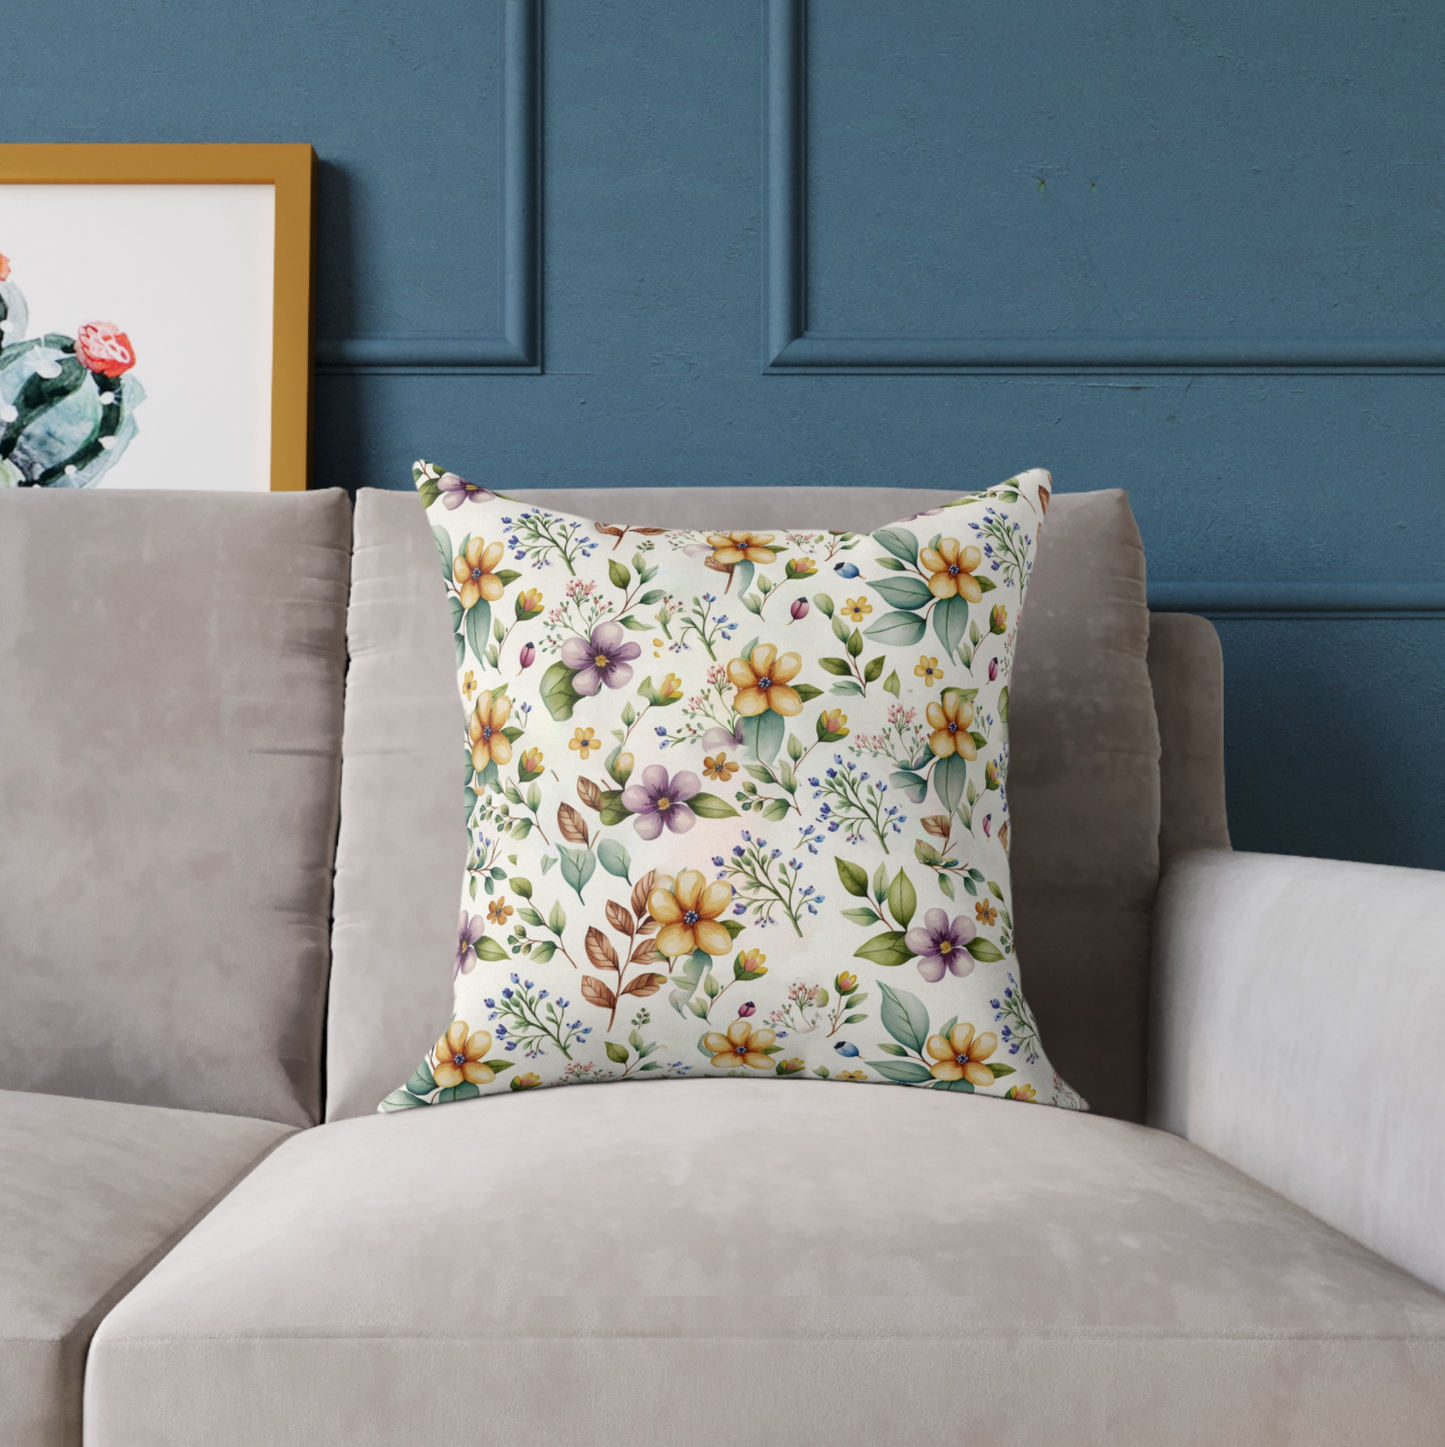 purple and yellow flower pattern on an accent throw pillow sitting on a living room couch, purple flower pillow on a chair, yellow flower print on a throw pillow